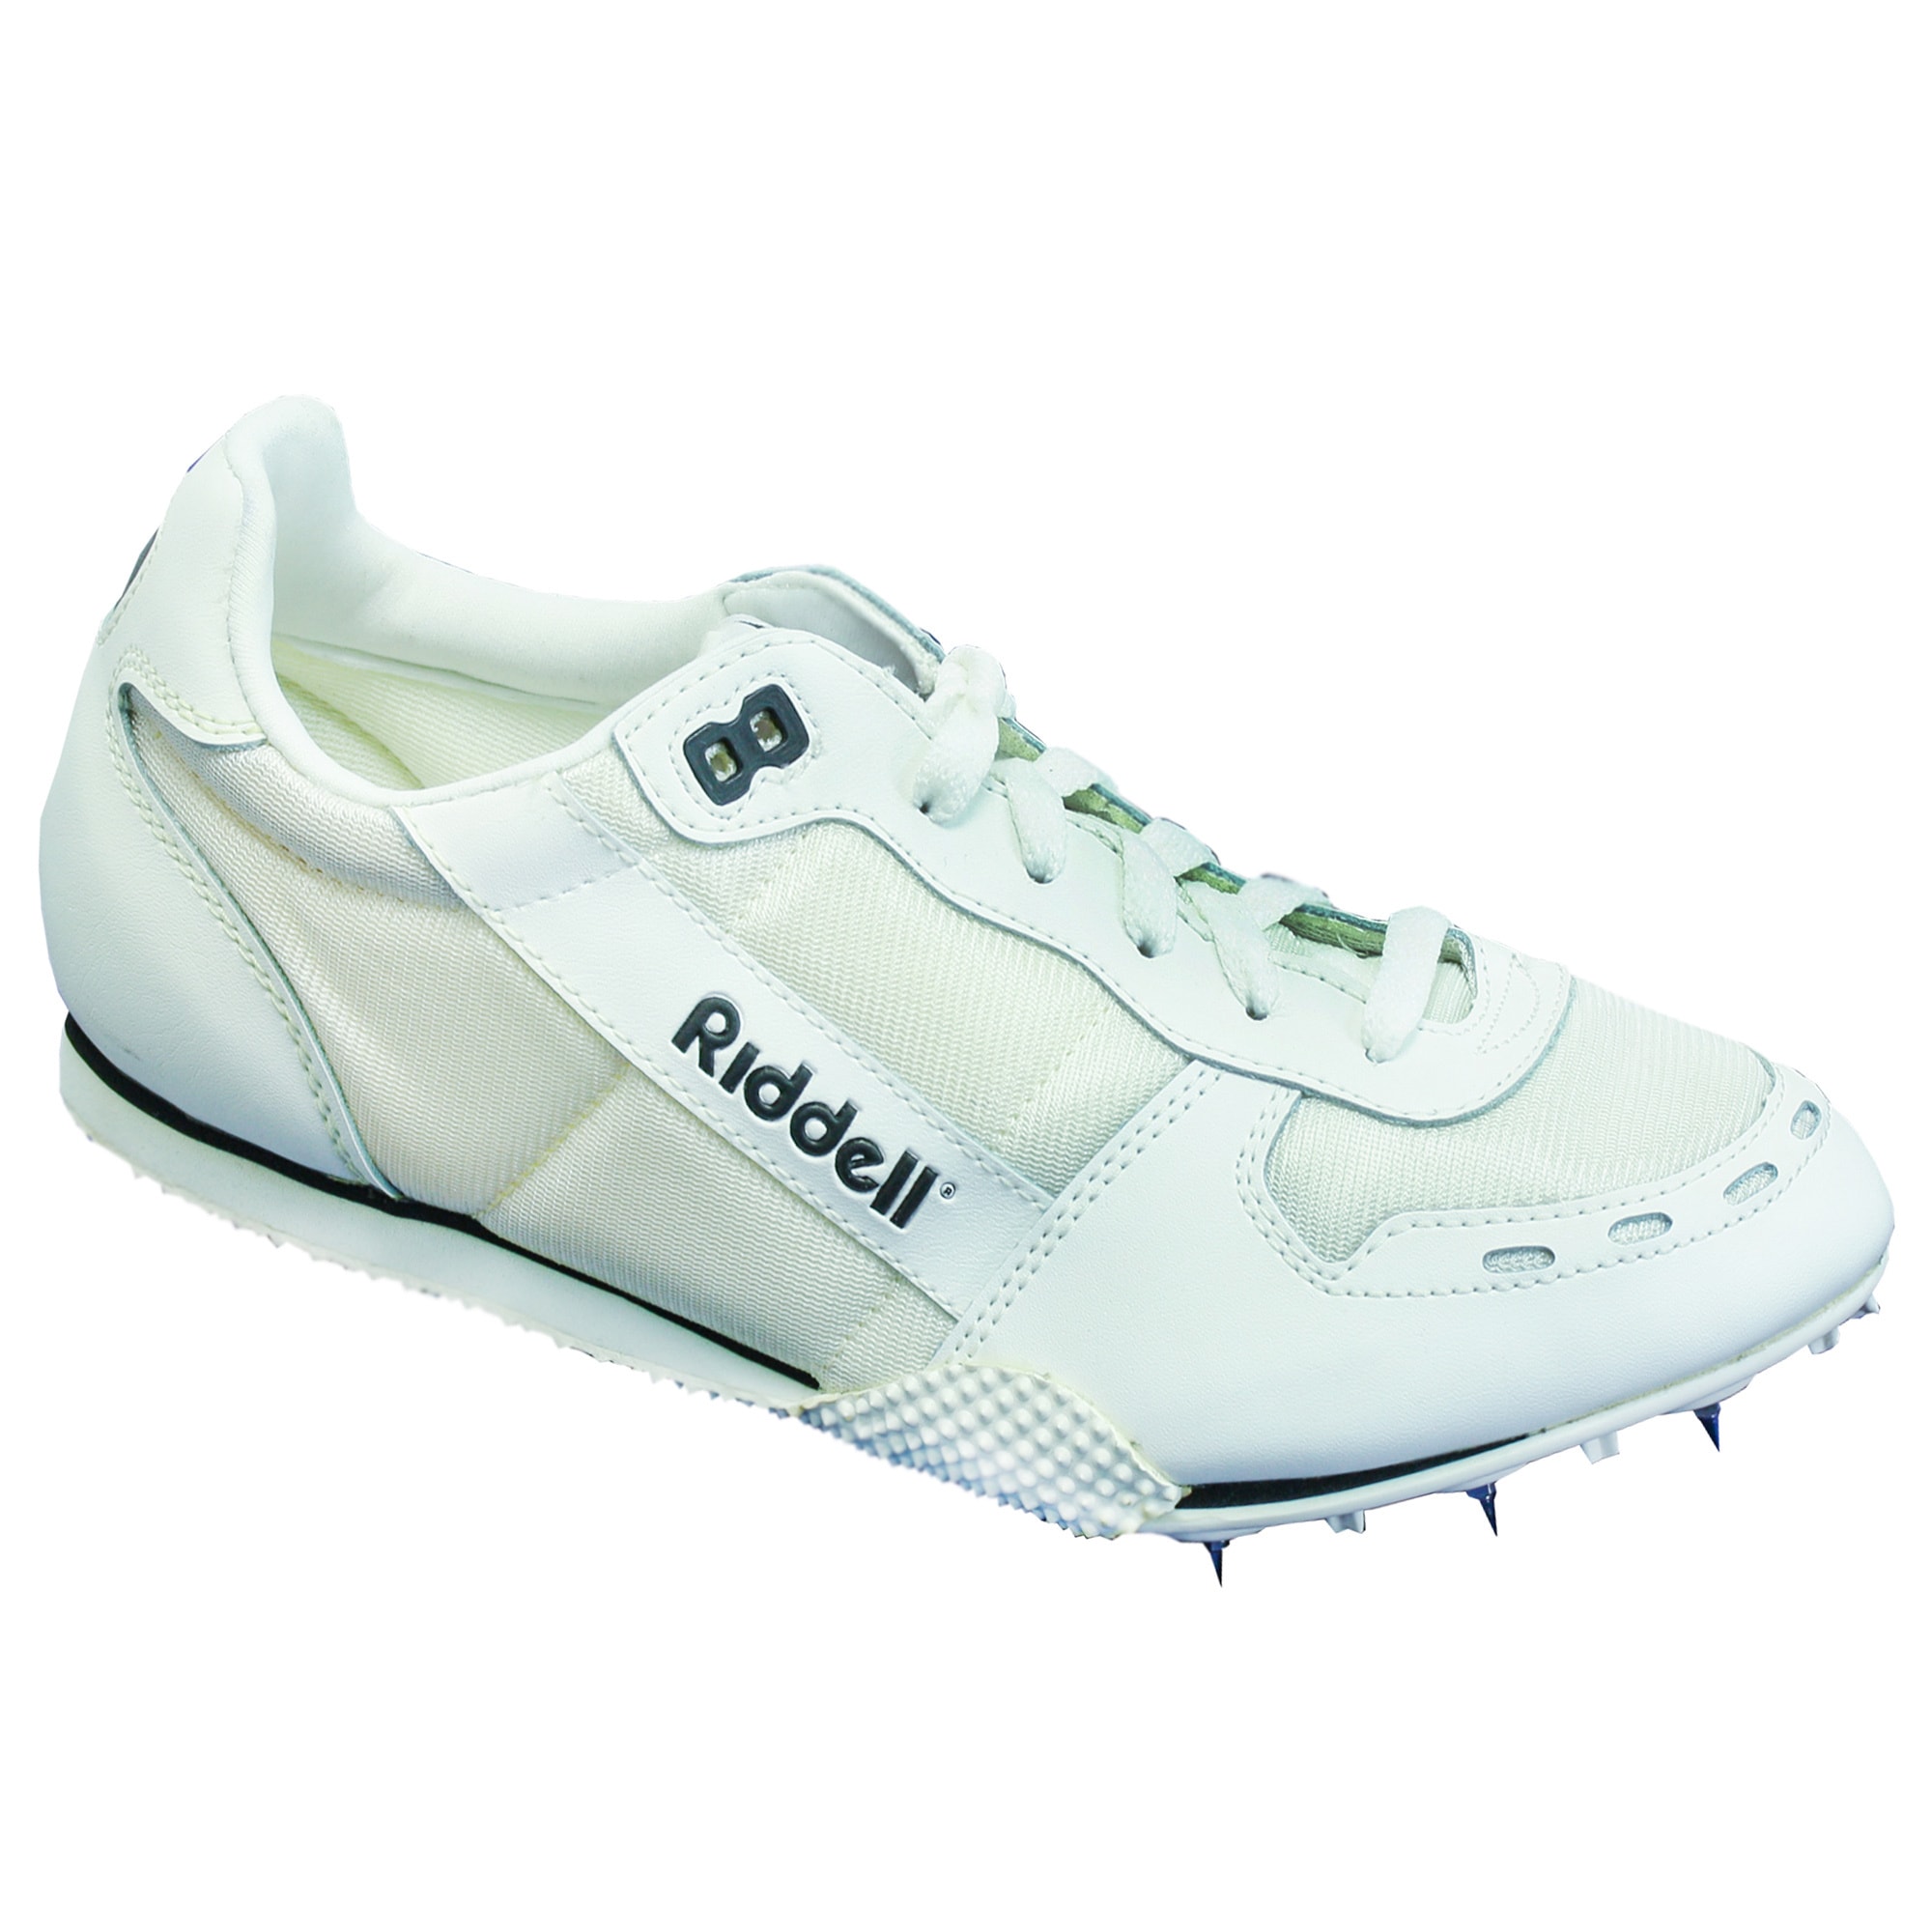 riddell tennis shoes